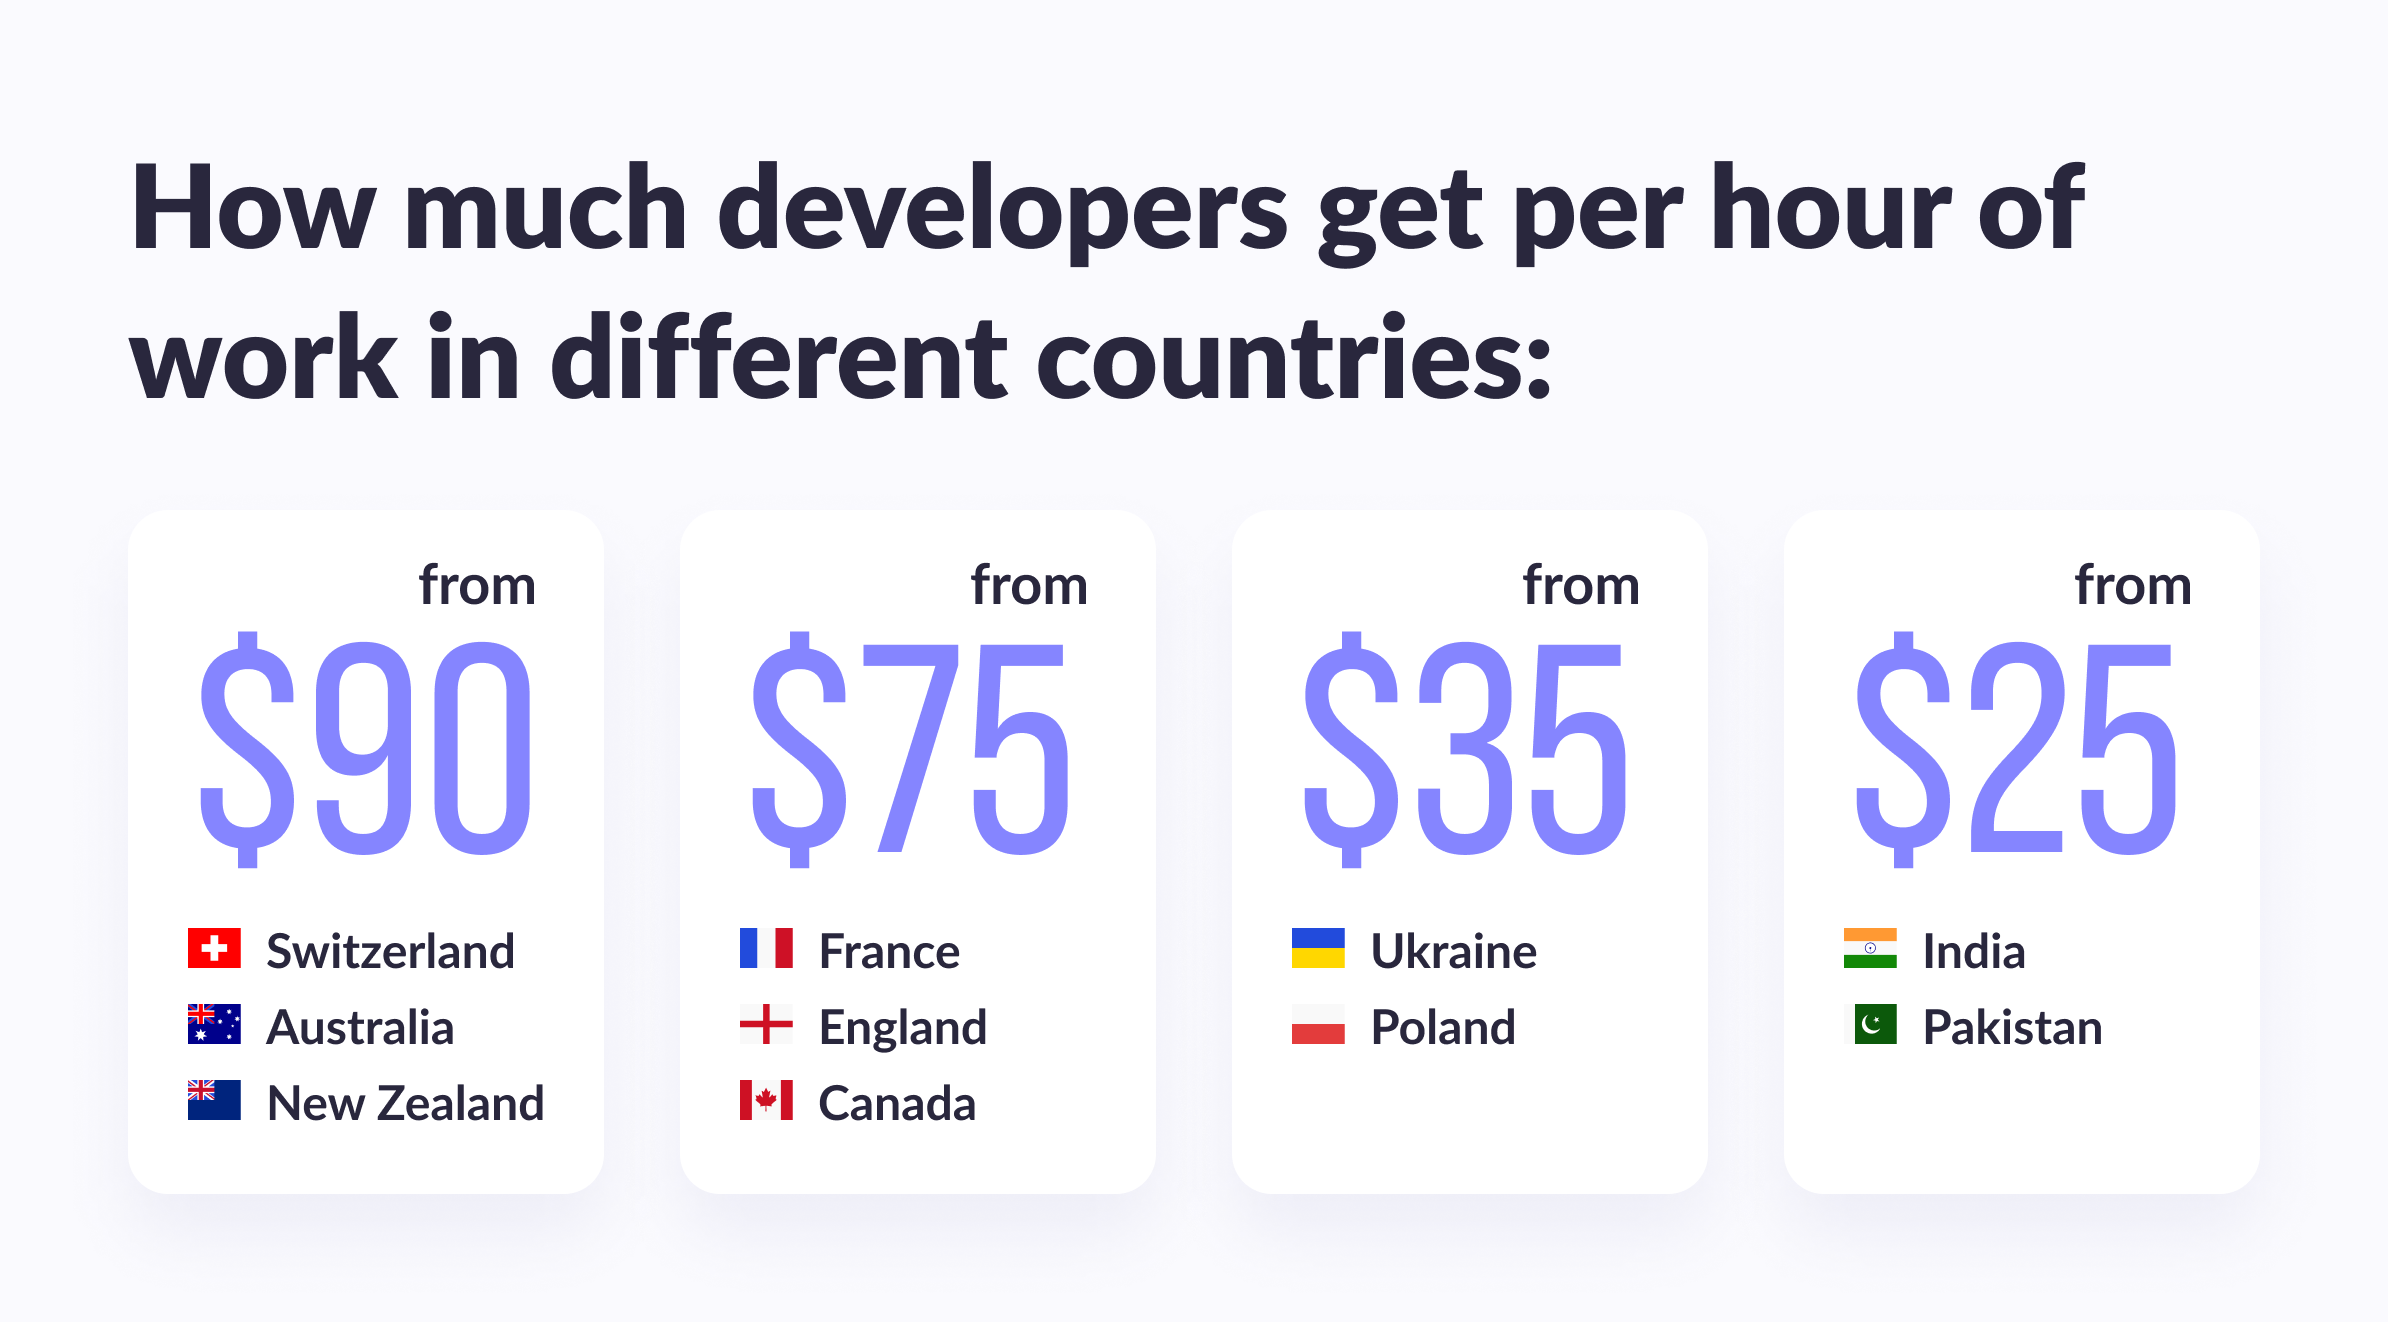 How much developers get per hour of work in different countries